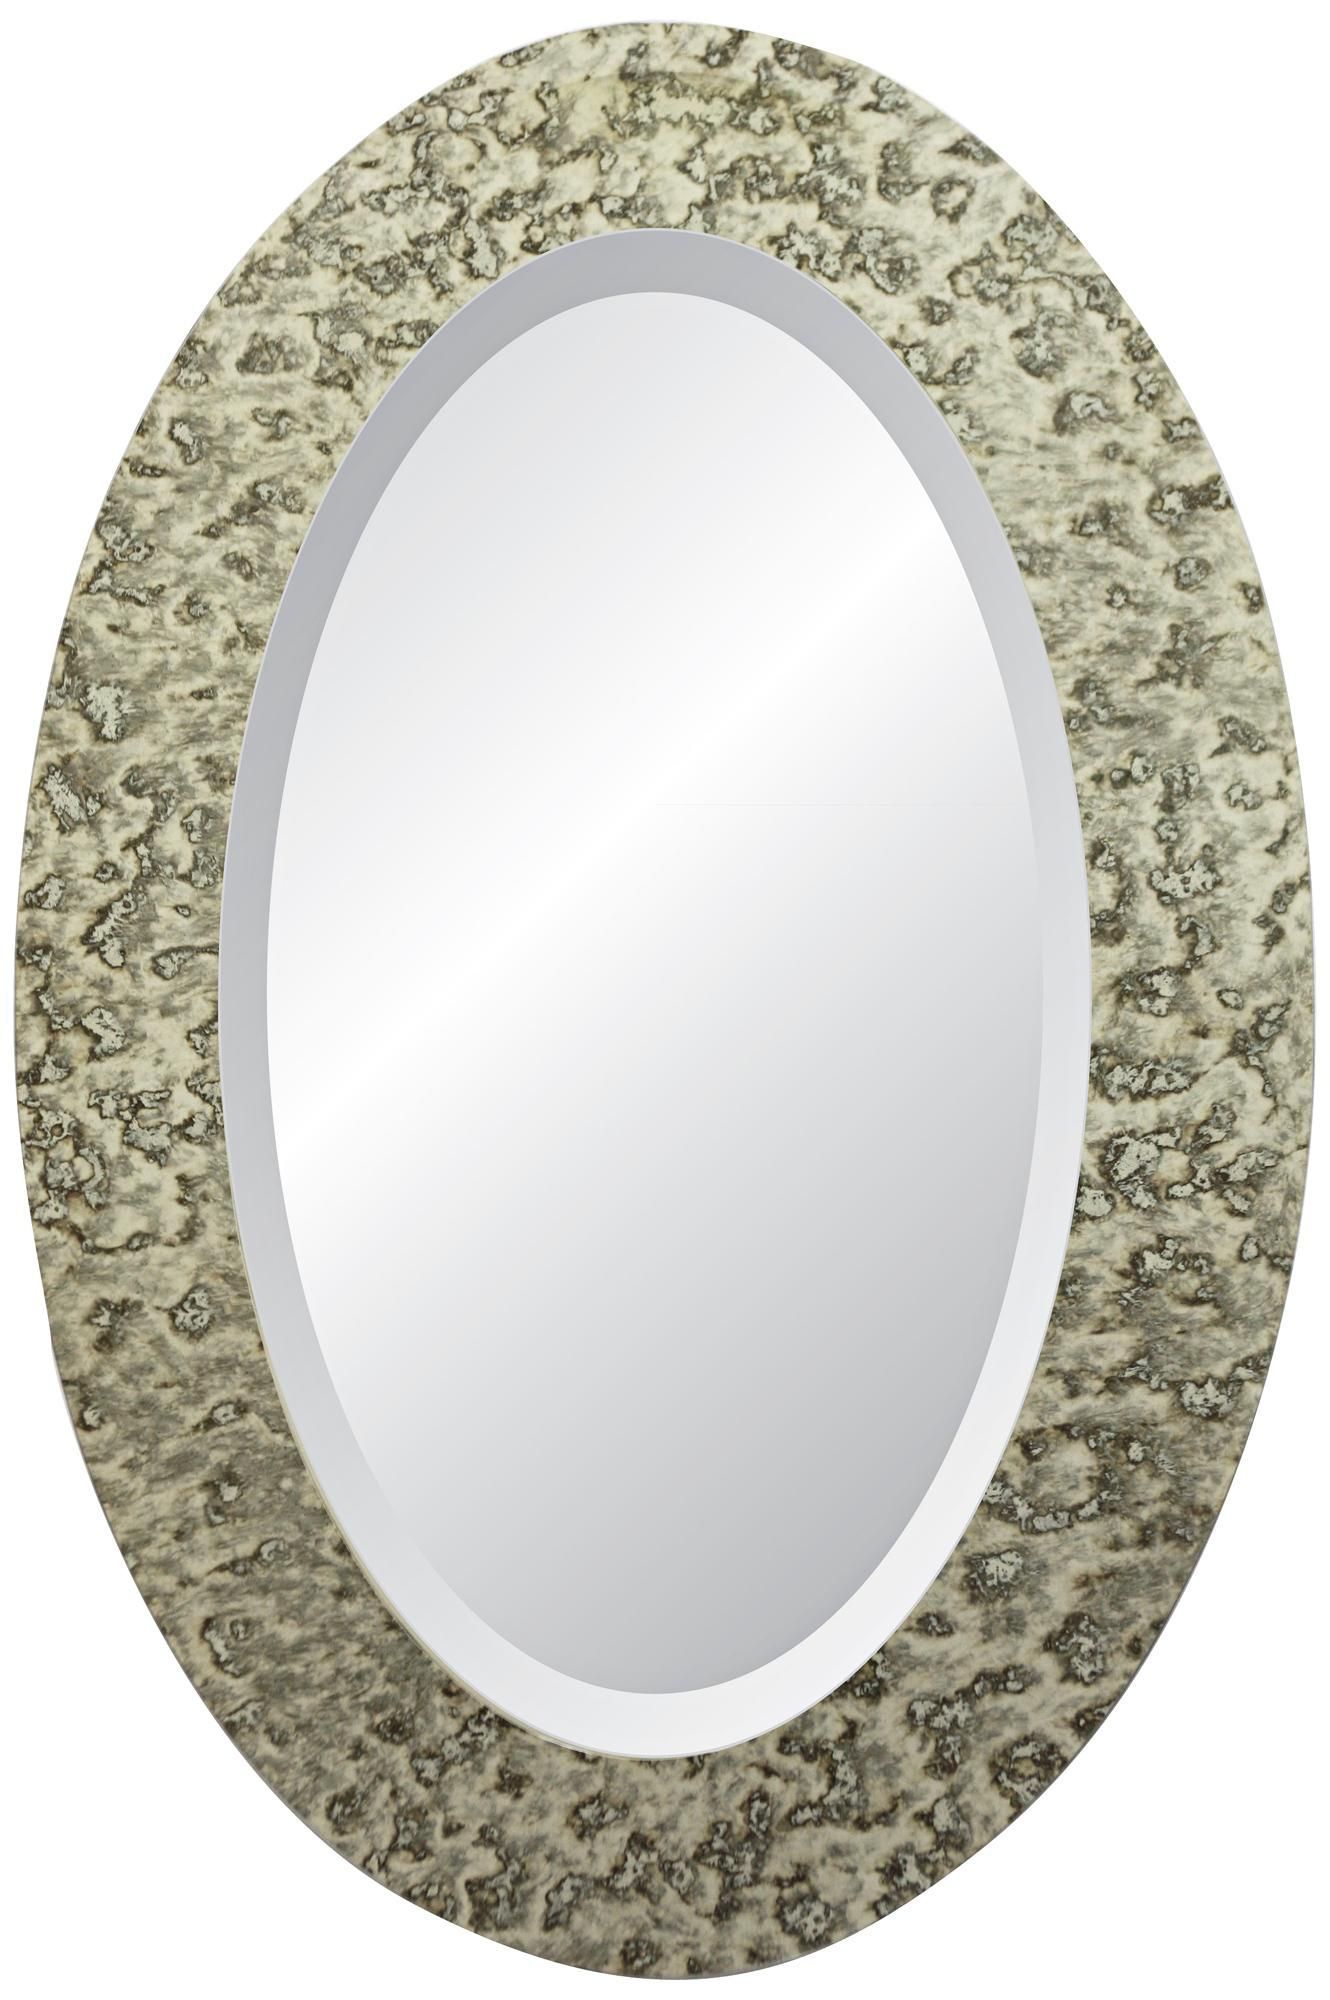 Dijon Signature 36" High Oval Wall Mirror – #X3060 | Lamps Plus | Oval Regarding Black Oval Cut Wall Mirrors (View 6 of 15)